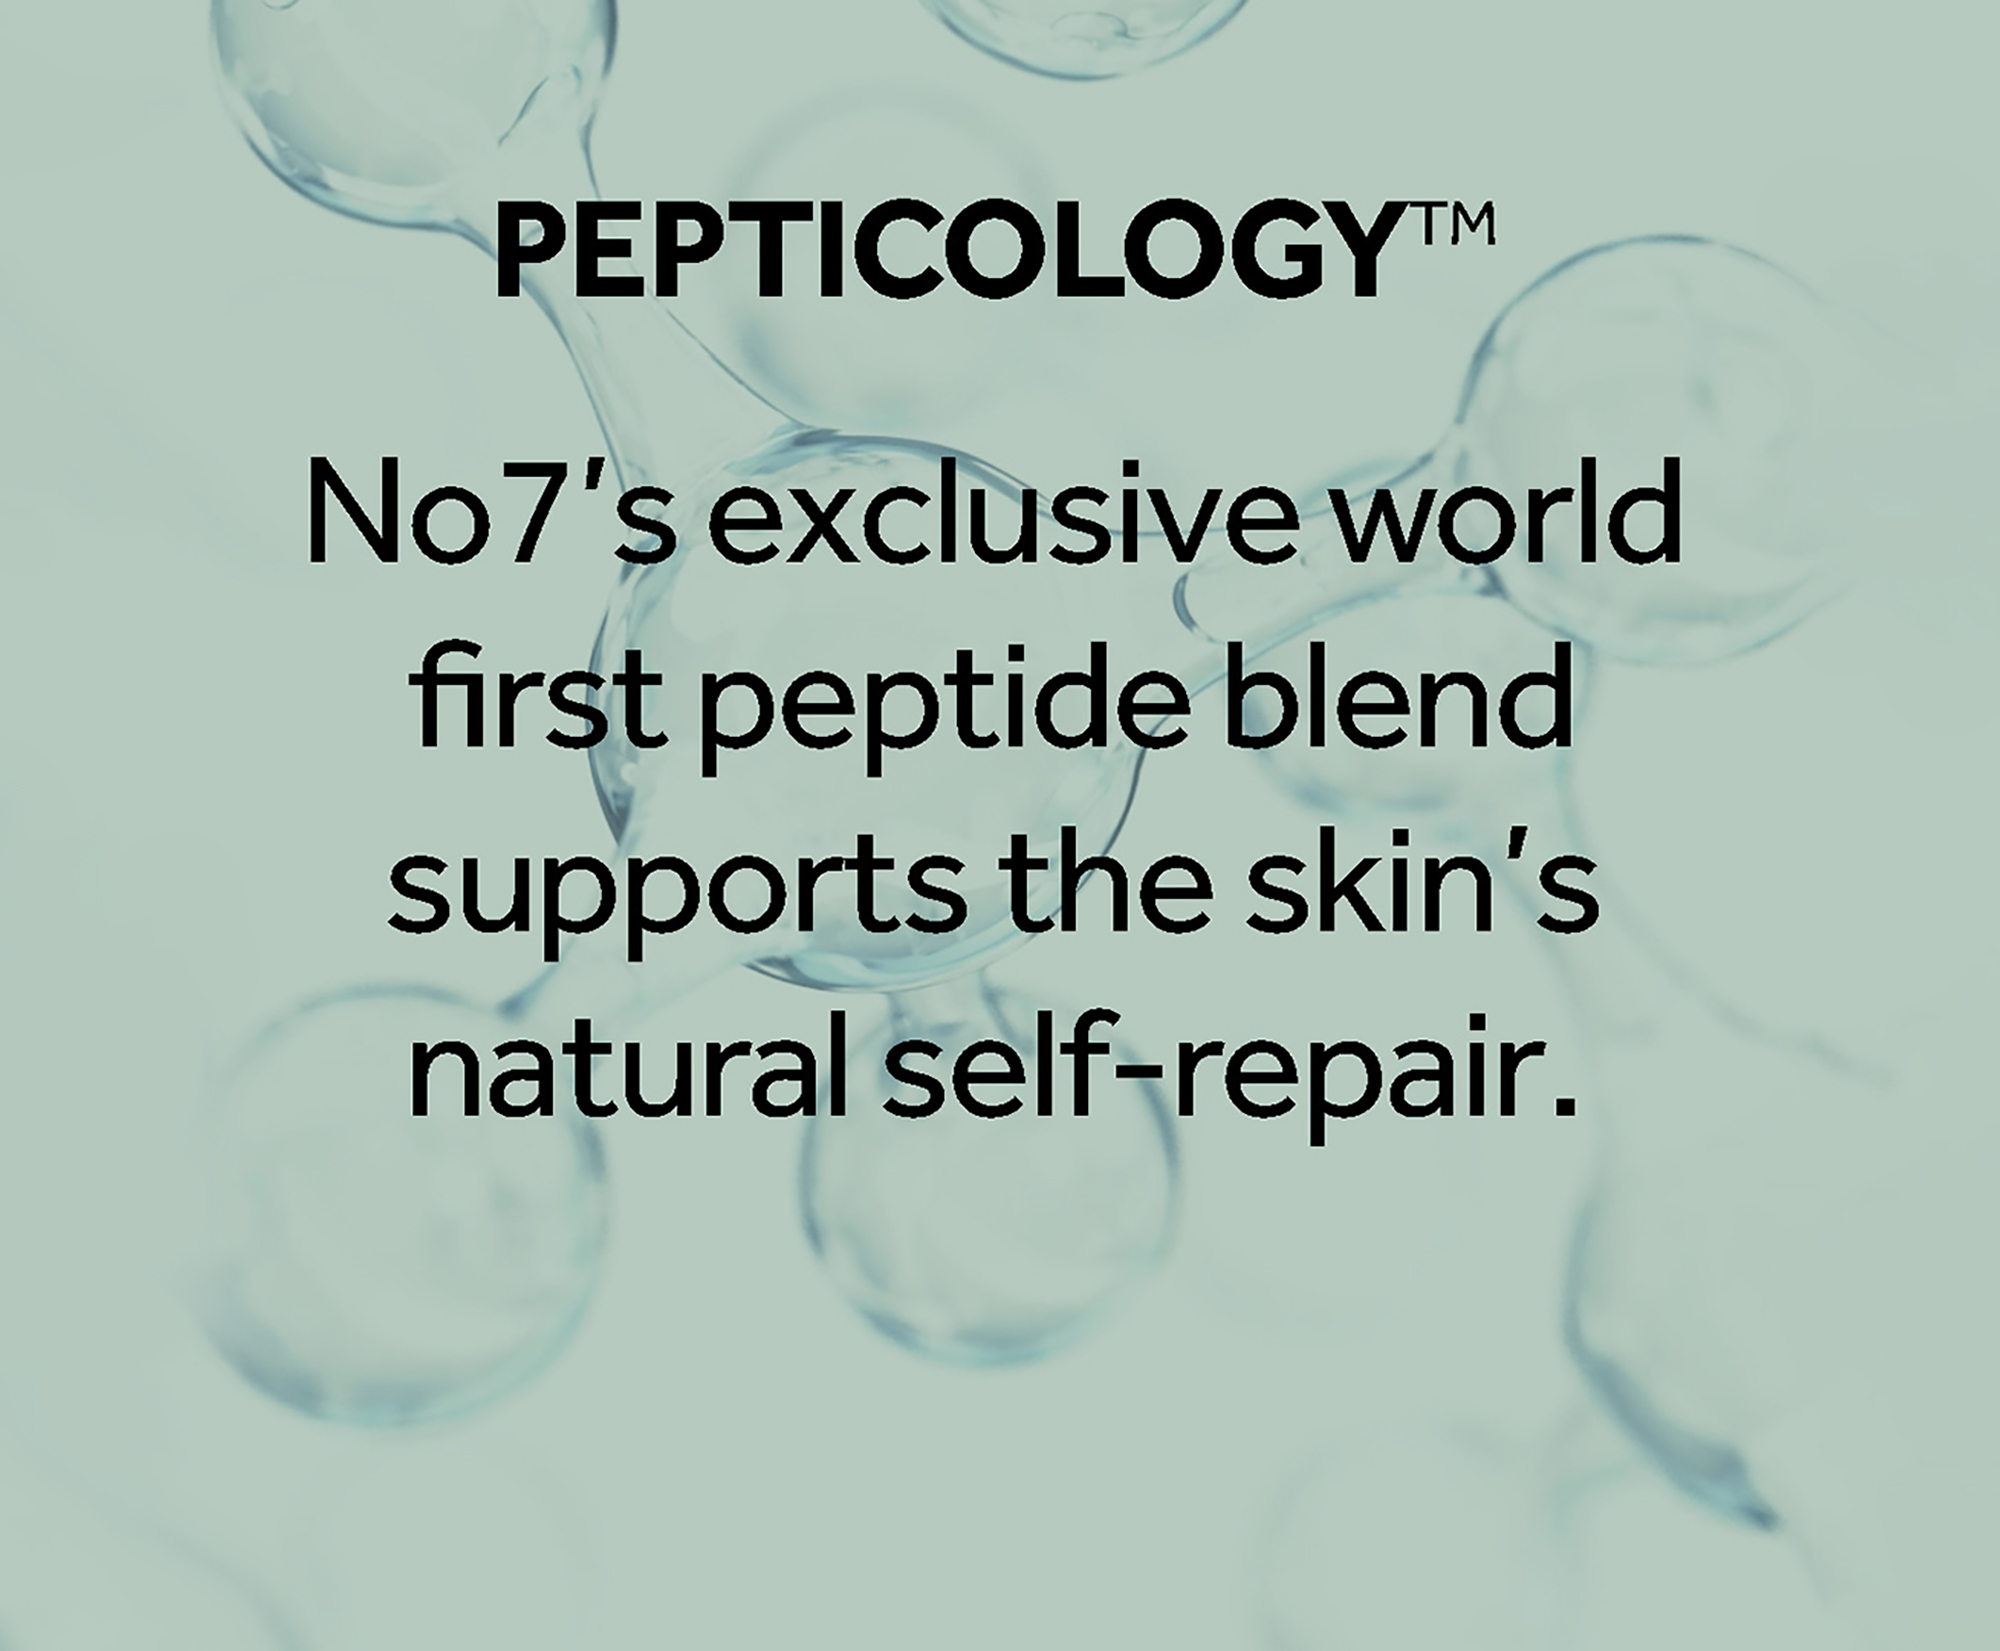 Pepticology No7's exclusive world first peptide blend supports the skin's natural self-repair.